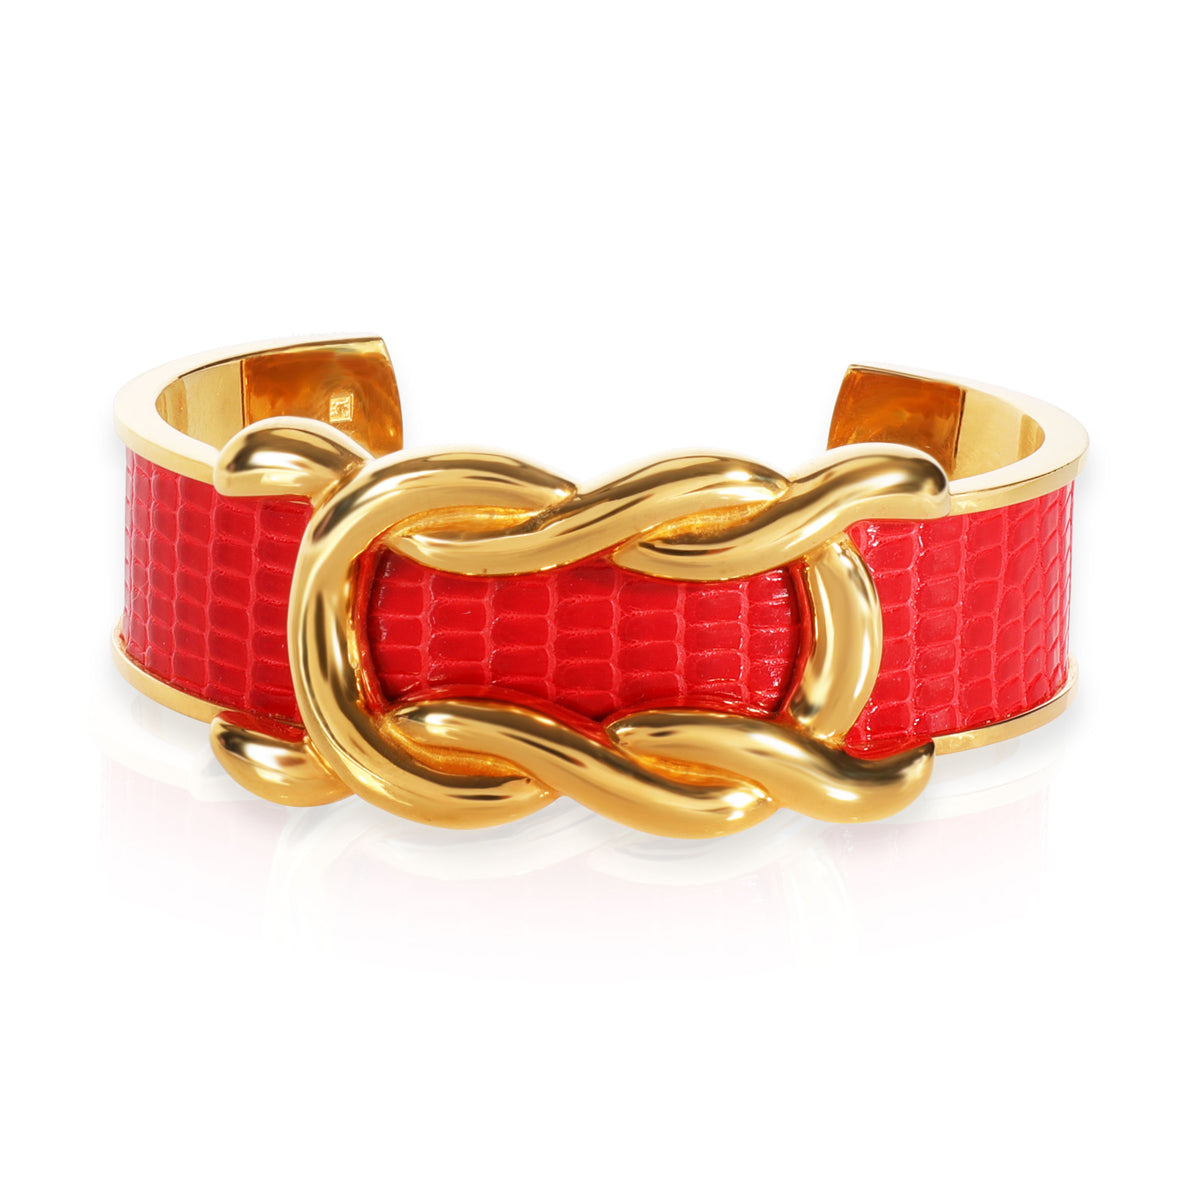 Vintage Hermès Gold-Plated Red Lizard Knot Cuff